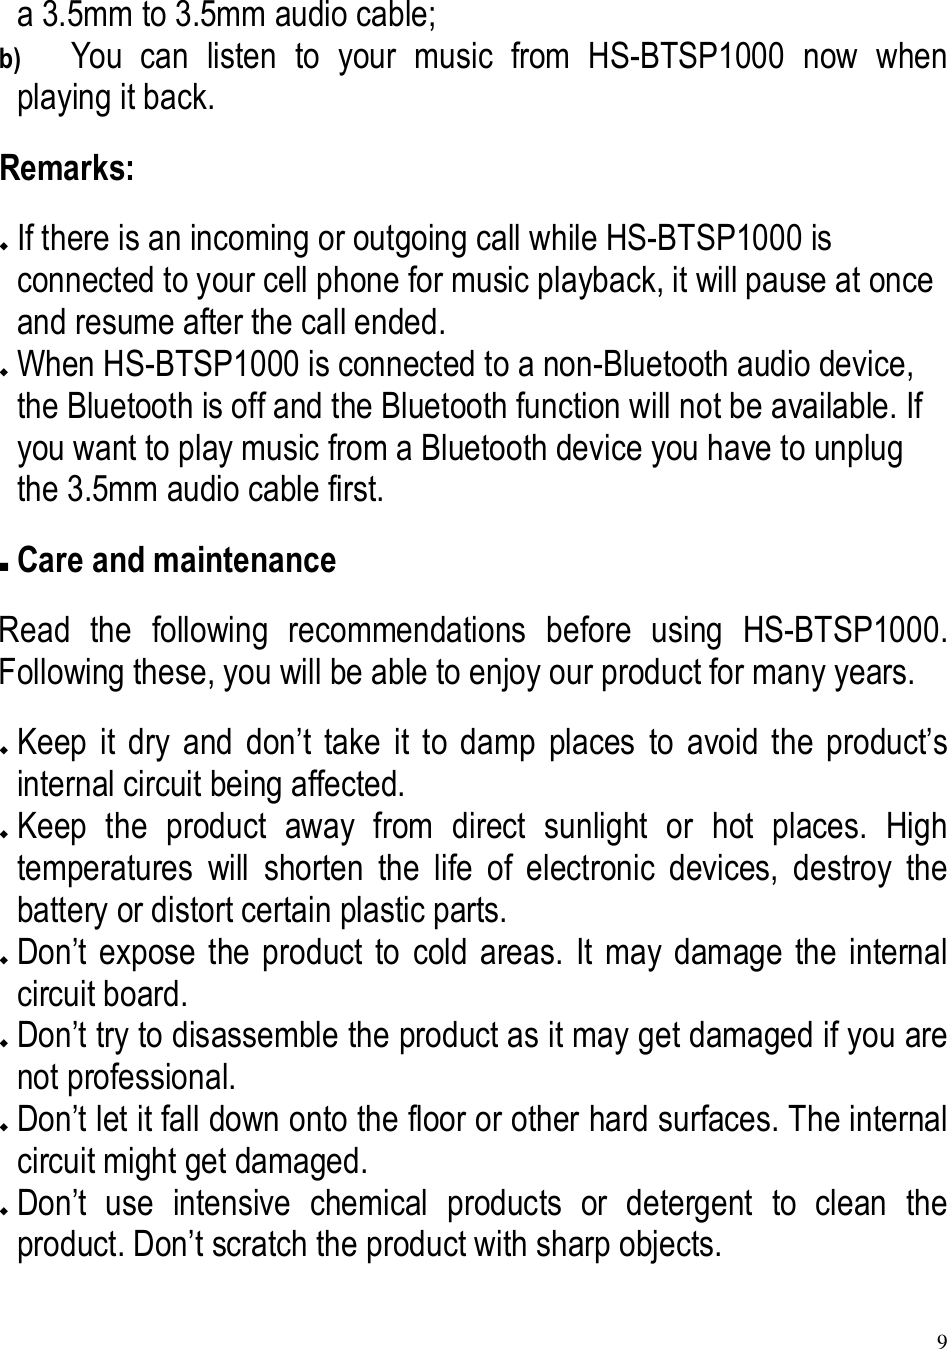 9  a 3.5mm to 3.5mm audio cable; b) You  can  listen  to  your  music  from  HS-BTSP1000  now  when playing it back. Remarks:  If there is an incoming or outgoing call while HS-BTSP1000 is connected to your cell phone for music playback, it will pause at once and resume after the call ended.  When HS-BTSP1000 is connected to a non-Bluetooth audio device, the Bluetooth is off and the Bluetooth function will not be available. If you want to play music from a Bluetooth device you have to unplug the 3.5mm audio cable first.  Care and maintenance Read  the  following  recommendations  before  using  HS-BTSP1000. Following these, you will be able to enjoy our product for many years.  Keep  it  dry  and  don’t  take  it  to  damp  places  to  avoid  the  product’s internal circuit being affected.  Keep  the  product  away  from  direct  sunlight  or  hot  places.  High temperatures  will  shorten  the  life  of  electronic  devices,  destroy  the battery or distort certain plastic parts.  Don’t  expose  the  product  to  cold  areas.  It  may  damage  the  internal circuit board.  Don’t try to disassemble the product as it may get damaged if you are not professional.  Don’t let it fall down onto the floor or other hard surfaces. The internal circuit might get damaged.  Don’t  use  intensive  chemical  products  or  detergent  to  clean  the product. Don’t scratch the product with sharp objects. 